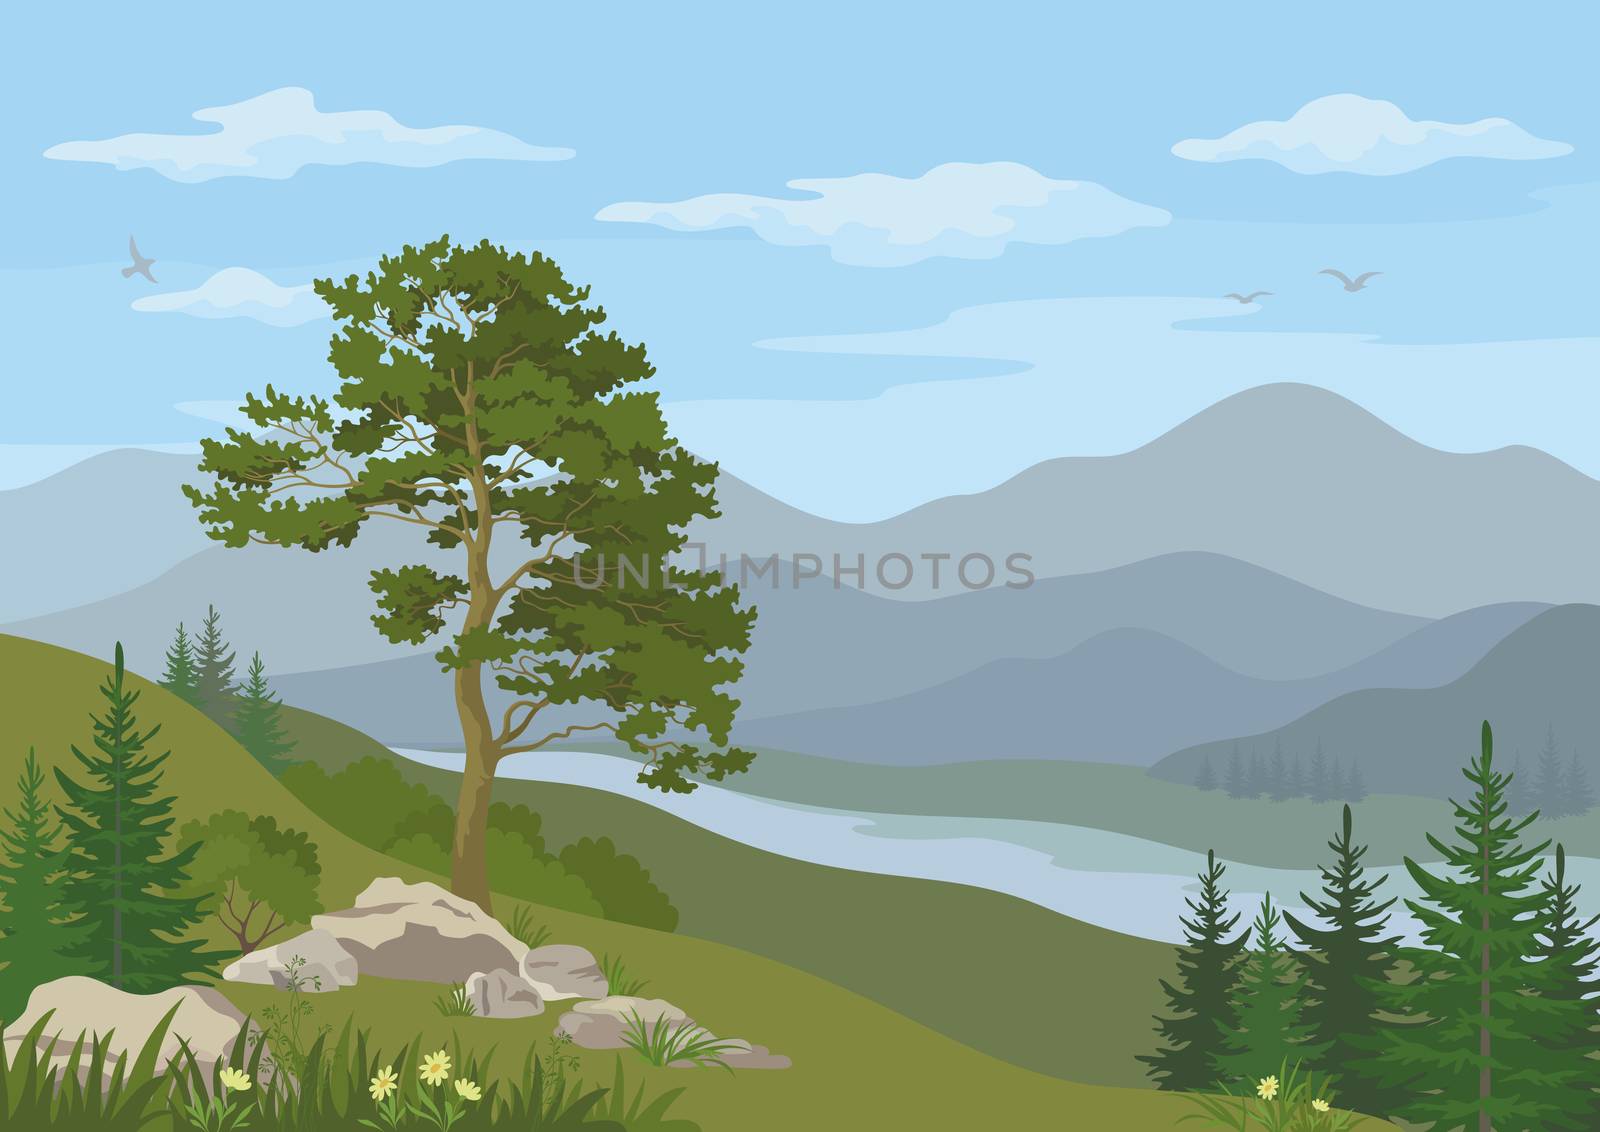 Mountain landscape with coniferous trees, river, flowers and blue cloudy sky.